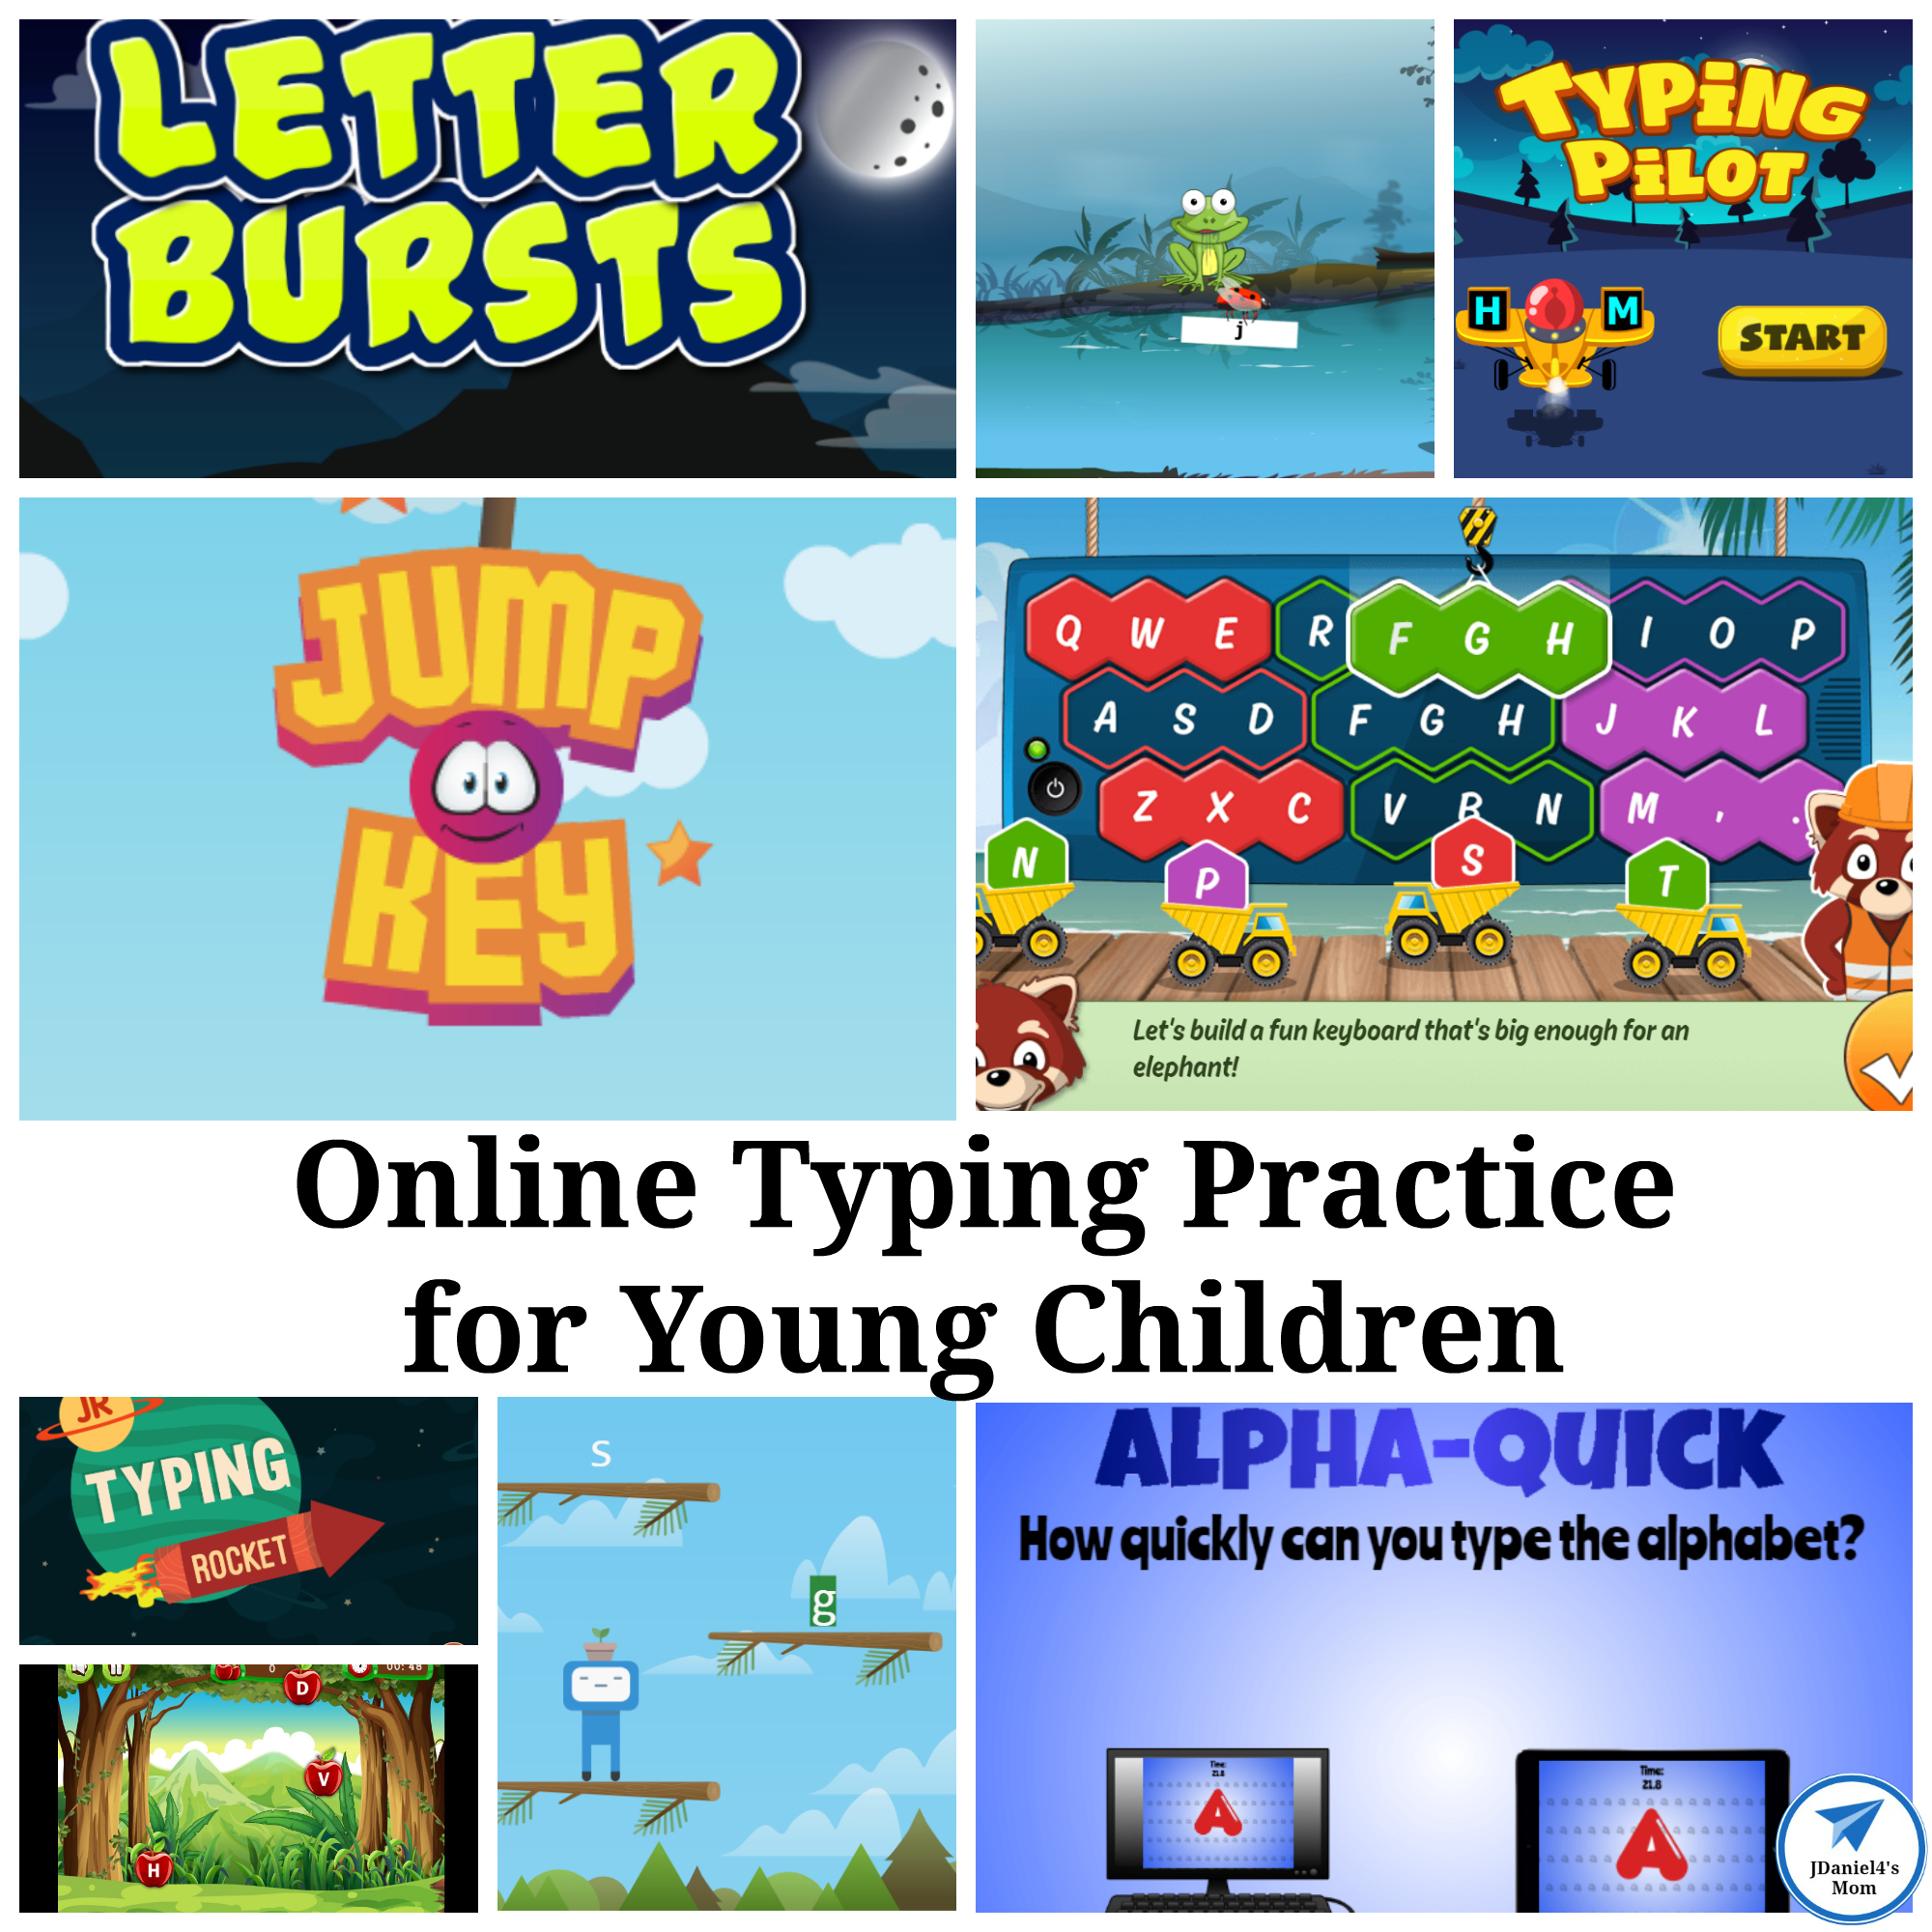 TYPING GAMES ⌨️ - Play Online Games!